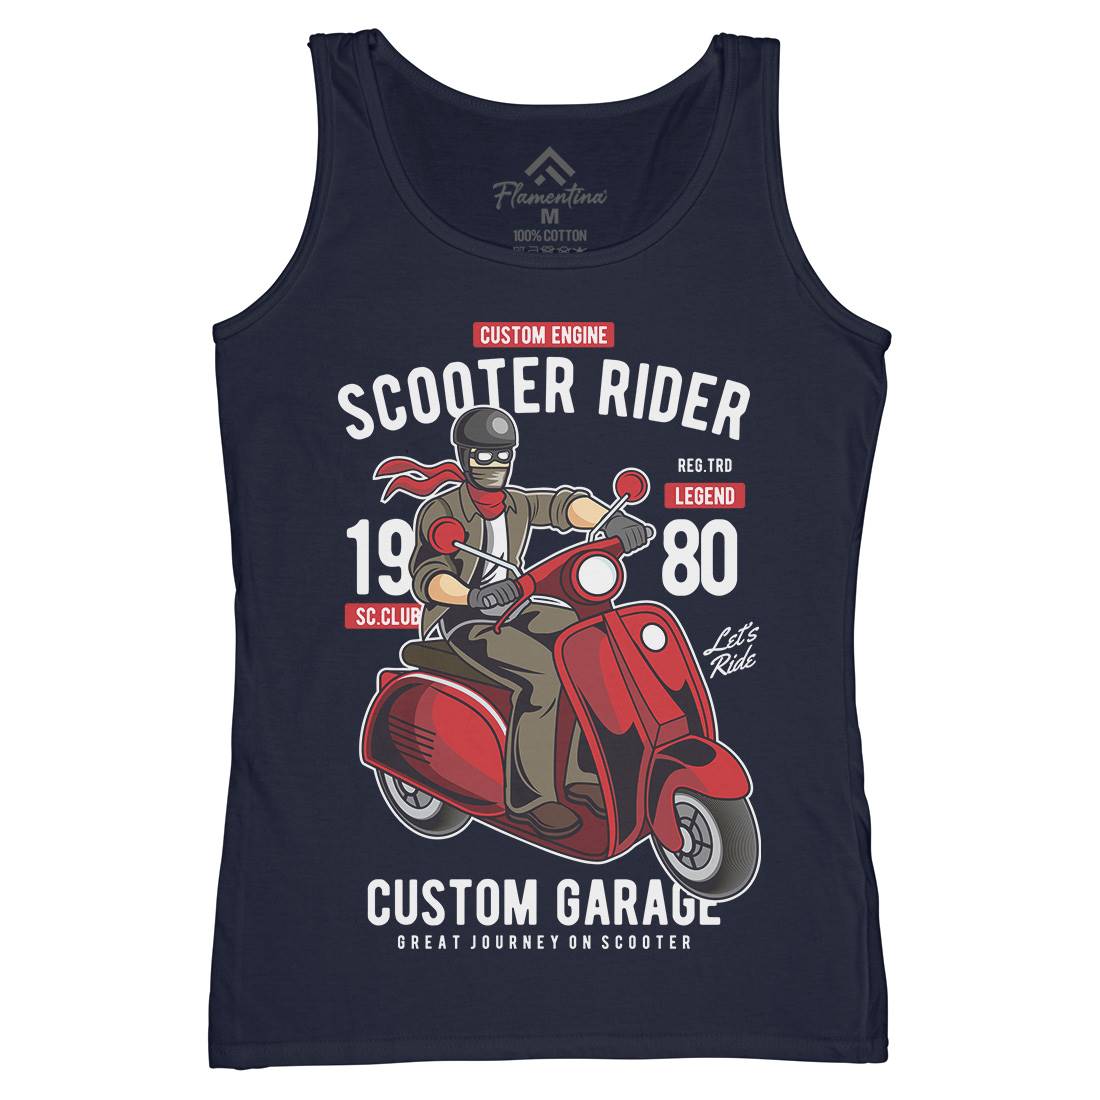 Scooter Rider Womens Organic Tank Top Vest Motorcycles C435